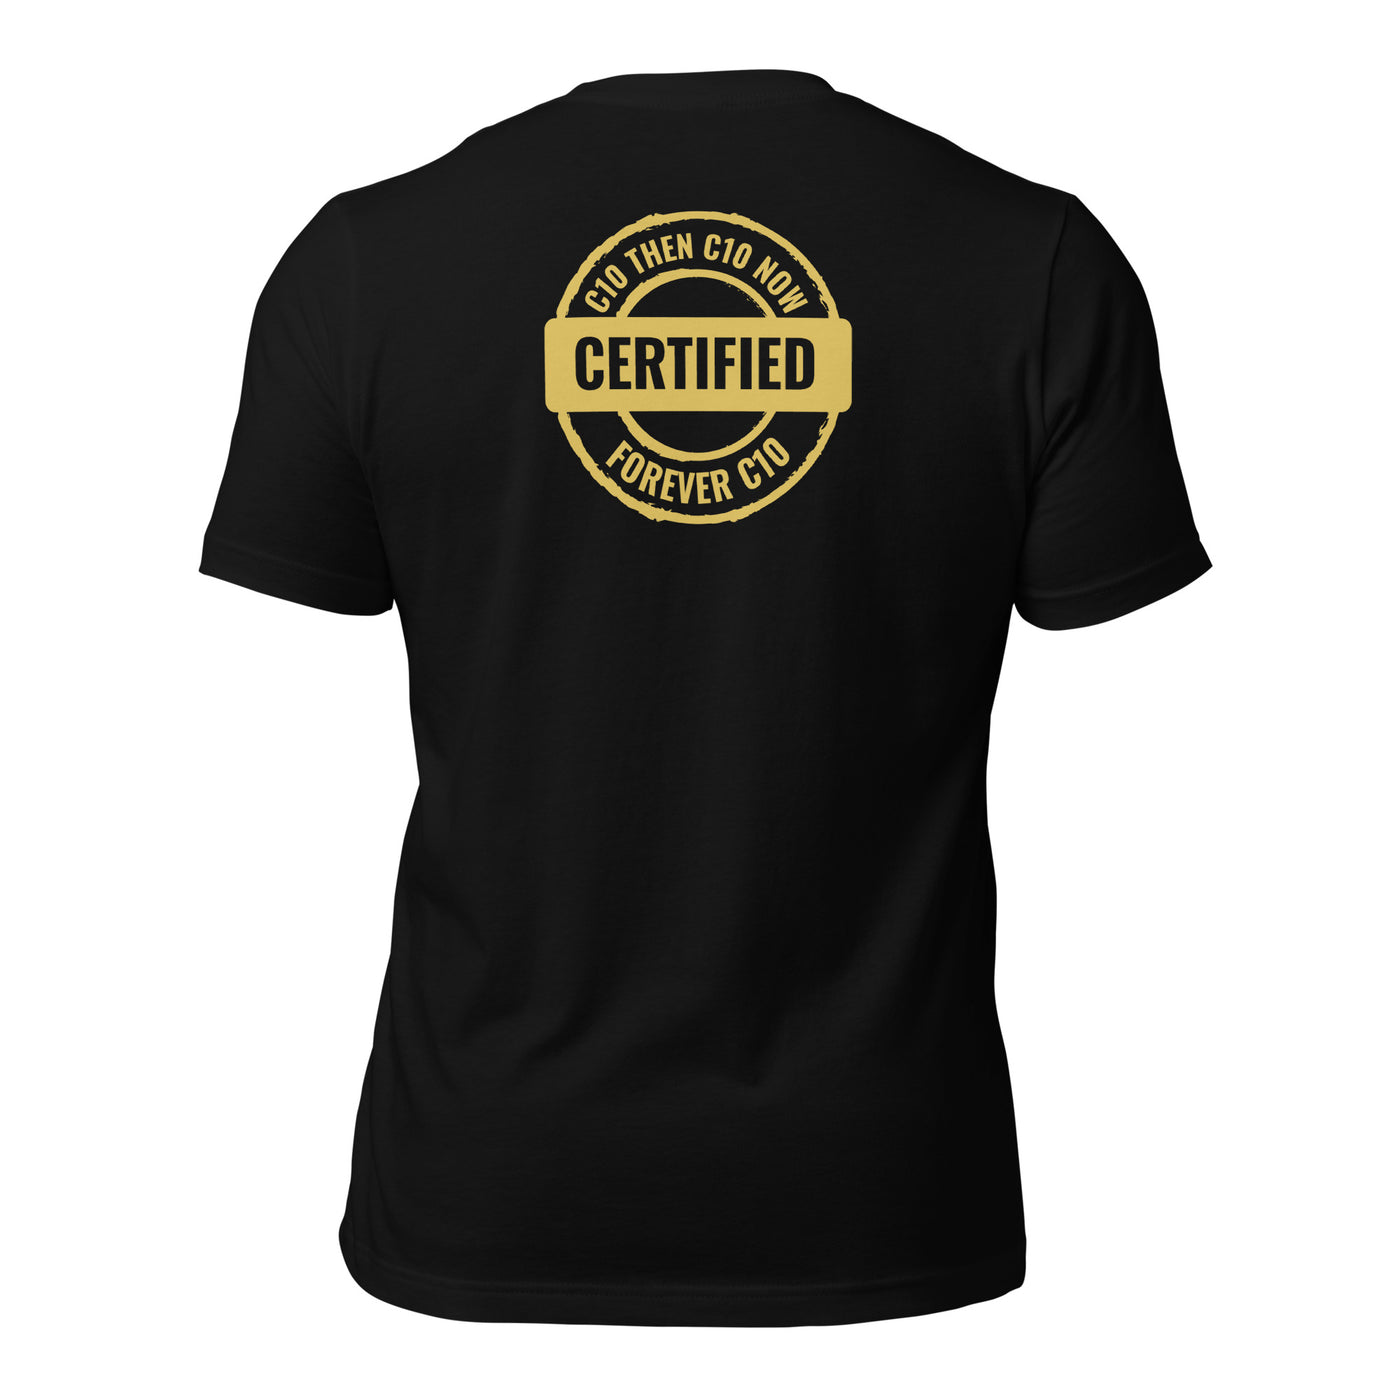 FOREVER CERTIFIED UNISEX T-SHIRT ( BACK PRINT ), Contemporary Unisex Tee Shirts, Best Unisex T-Shirt Deals, Universal Fit T-Shirts, Inclusive UnisexUnisex t-shirt